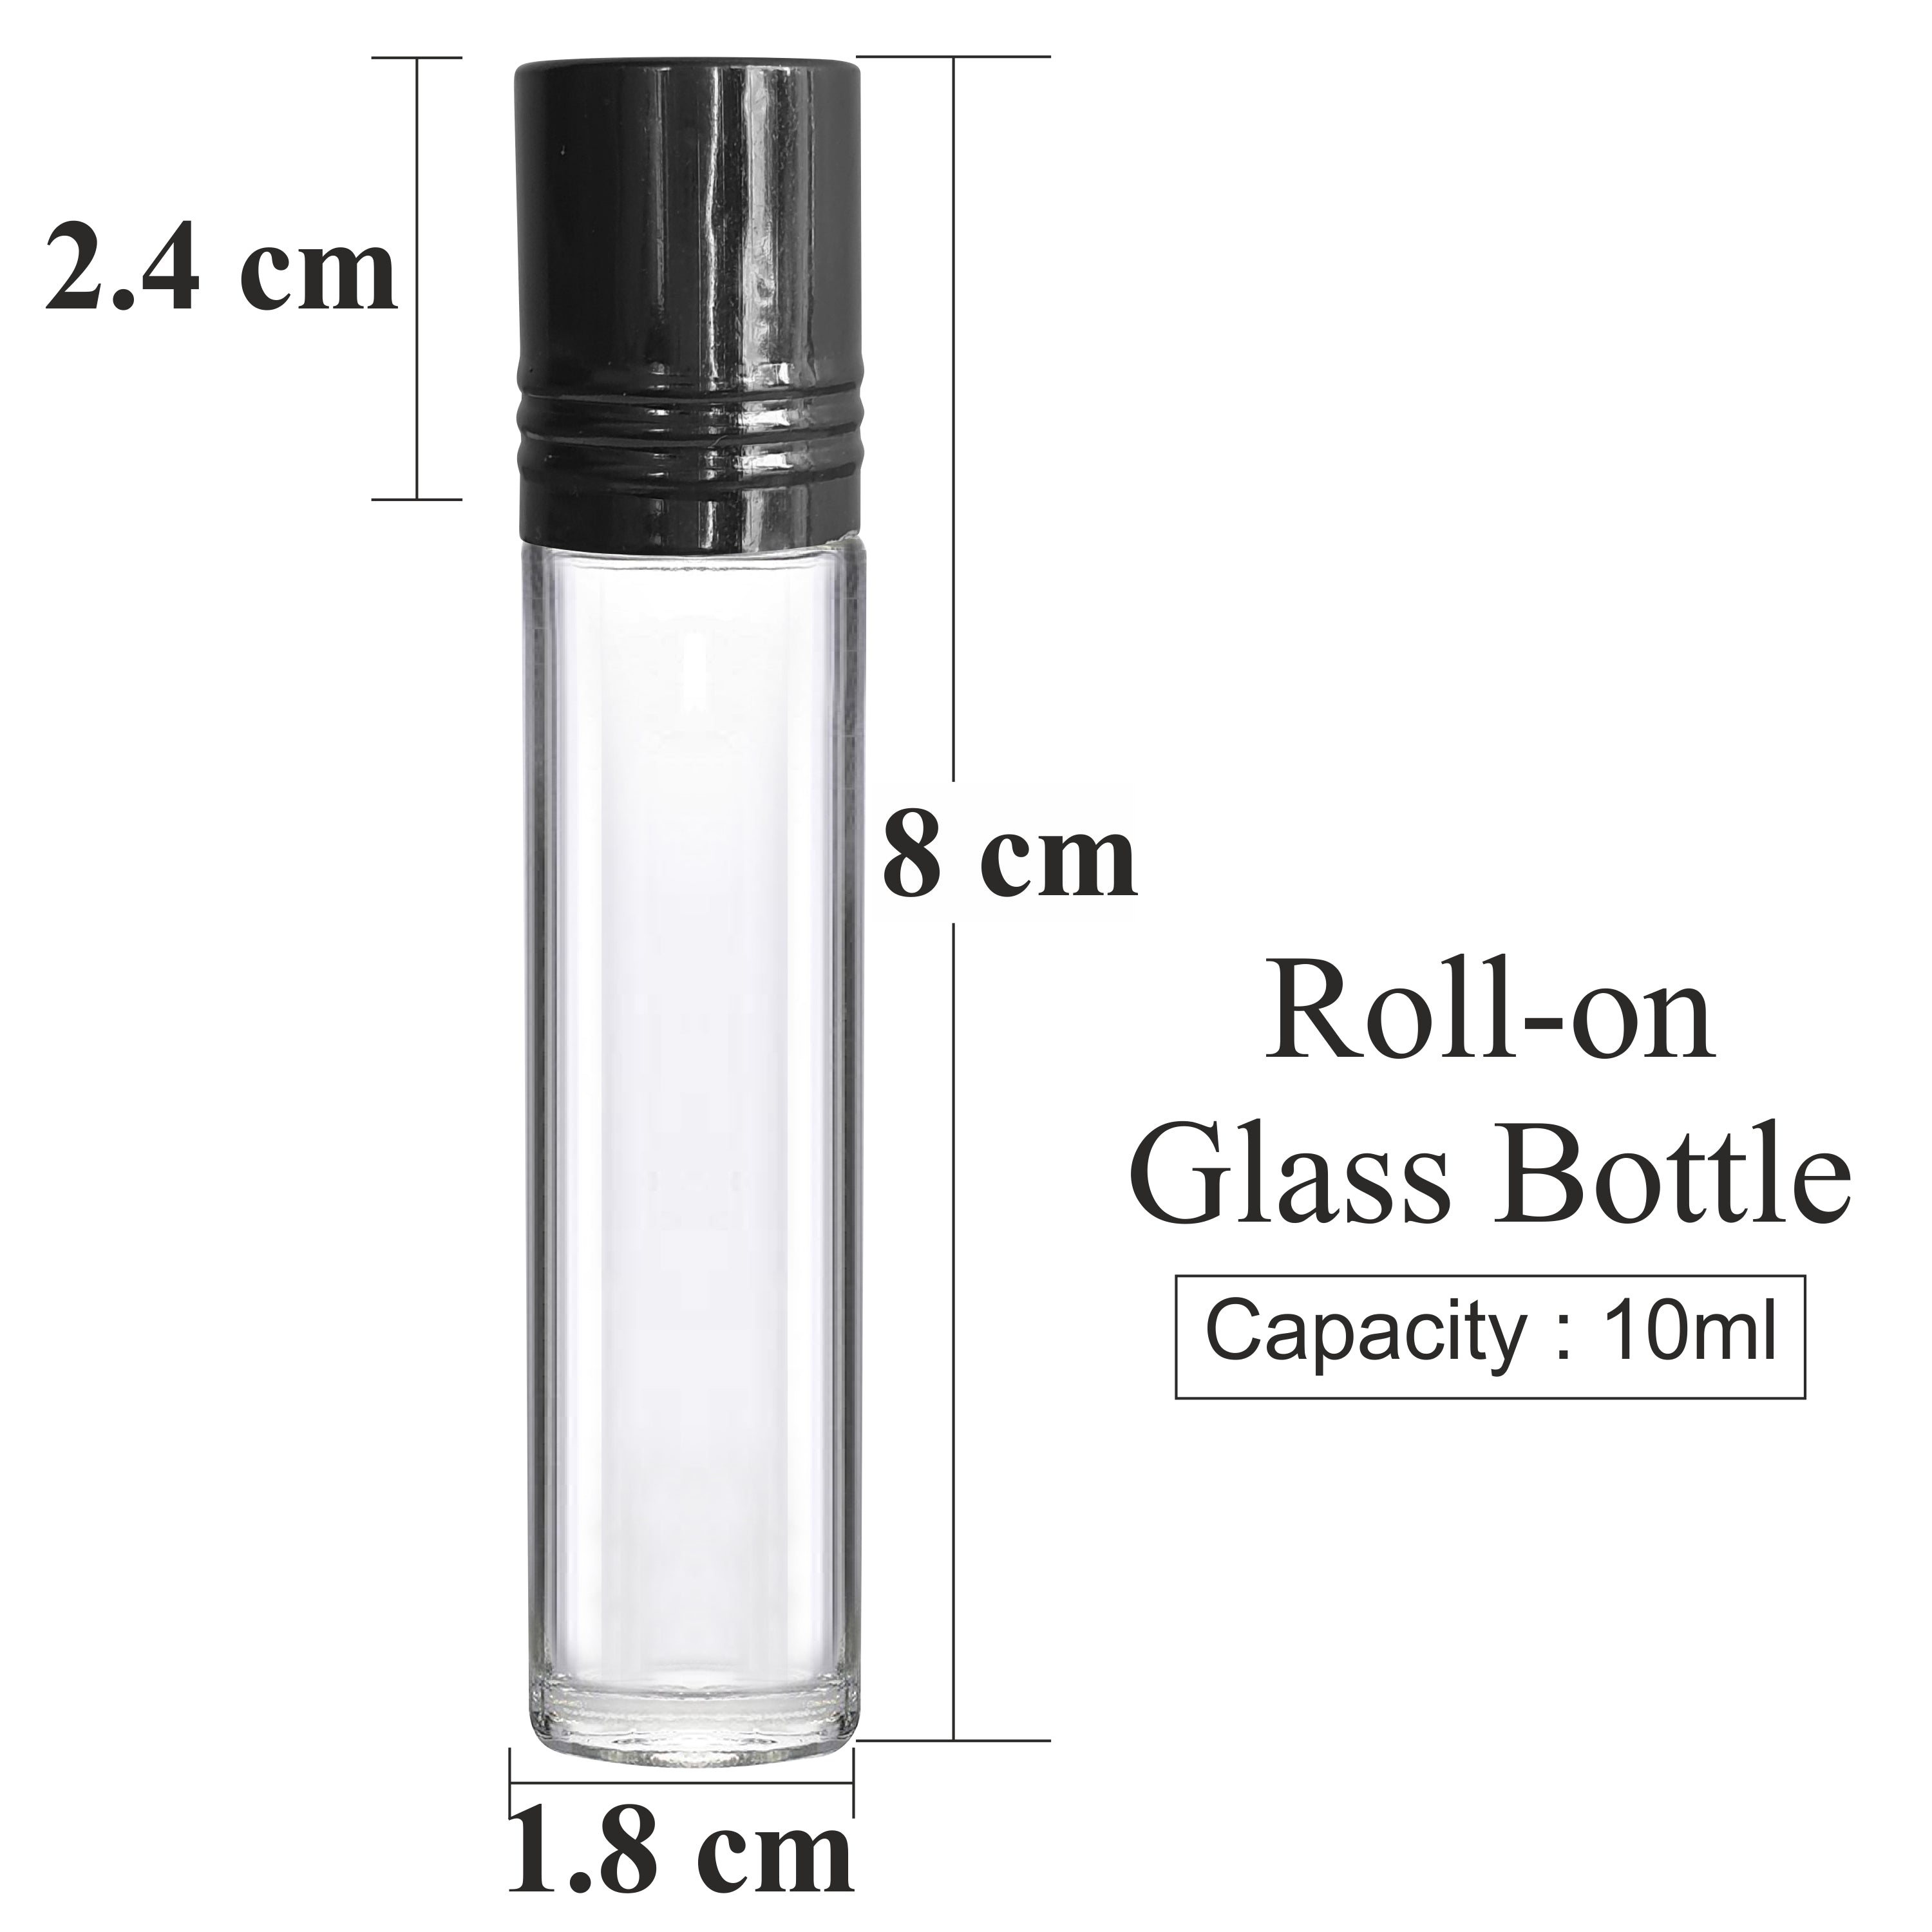 Essential Oil Roller Bottles, Empty Refillable Clear Glass Roll-on Bottles Perfume Roller Bottles with Roller Balls and Black Cap |ZMG41|